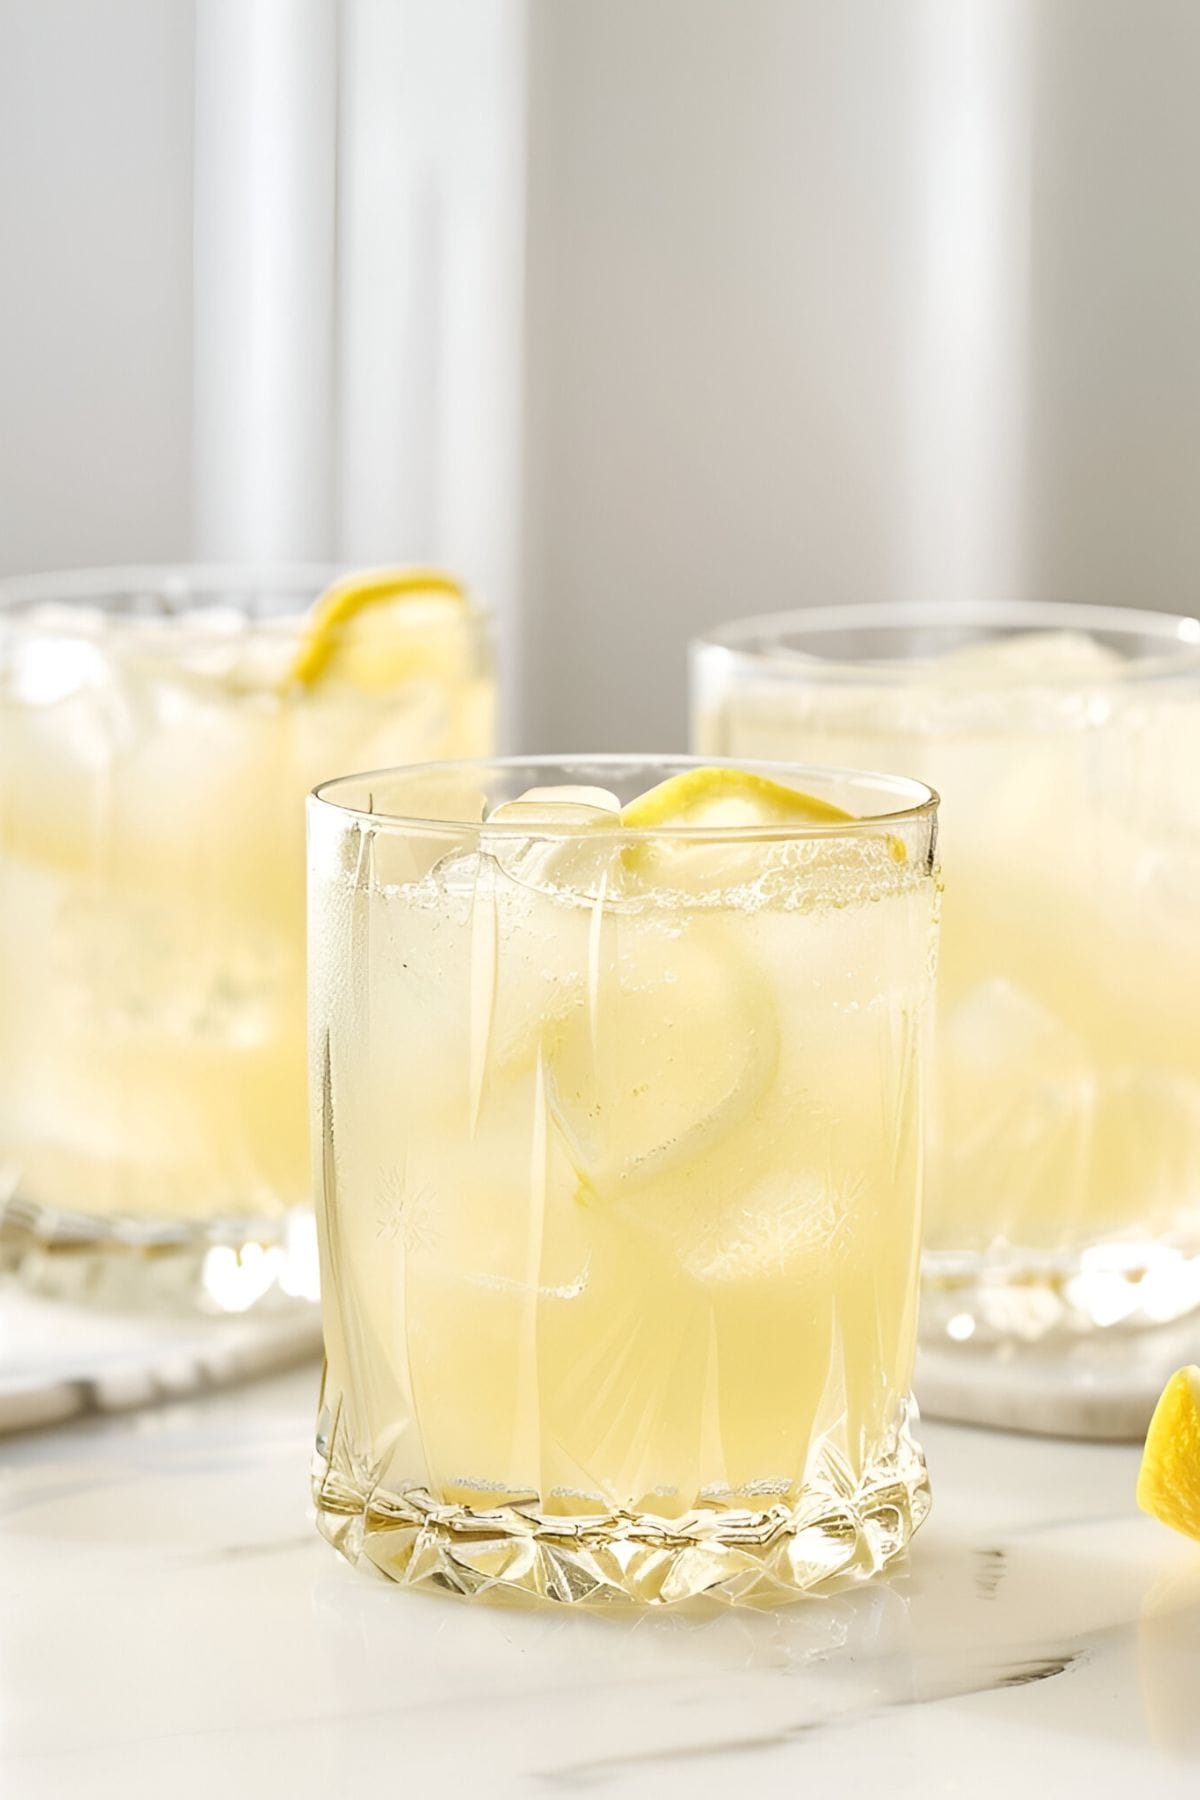 Three Glasses of Chick-Fil-A Lemonade with Ice and Slices of Lemon